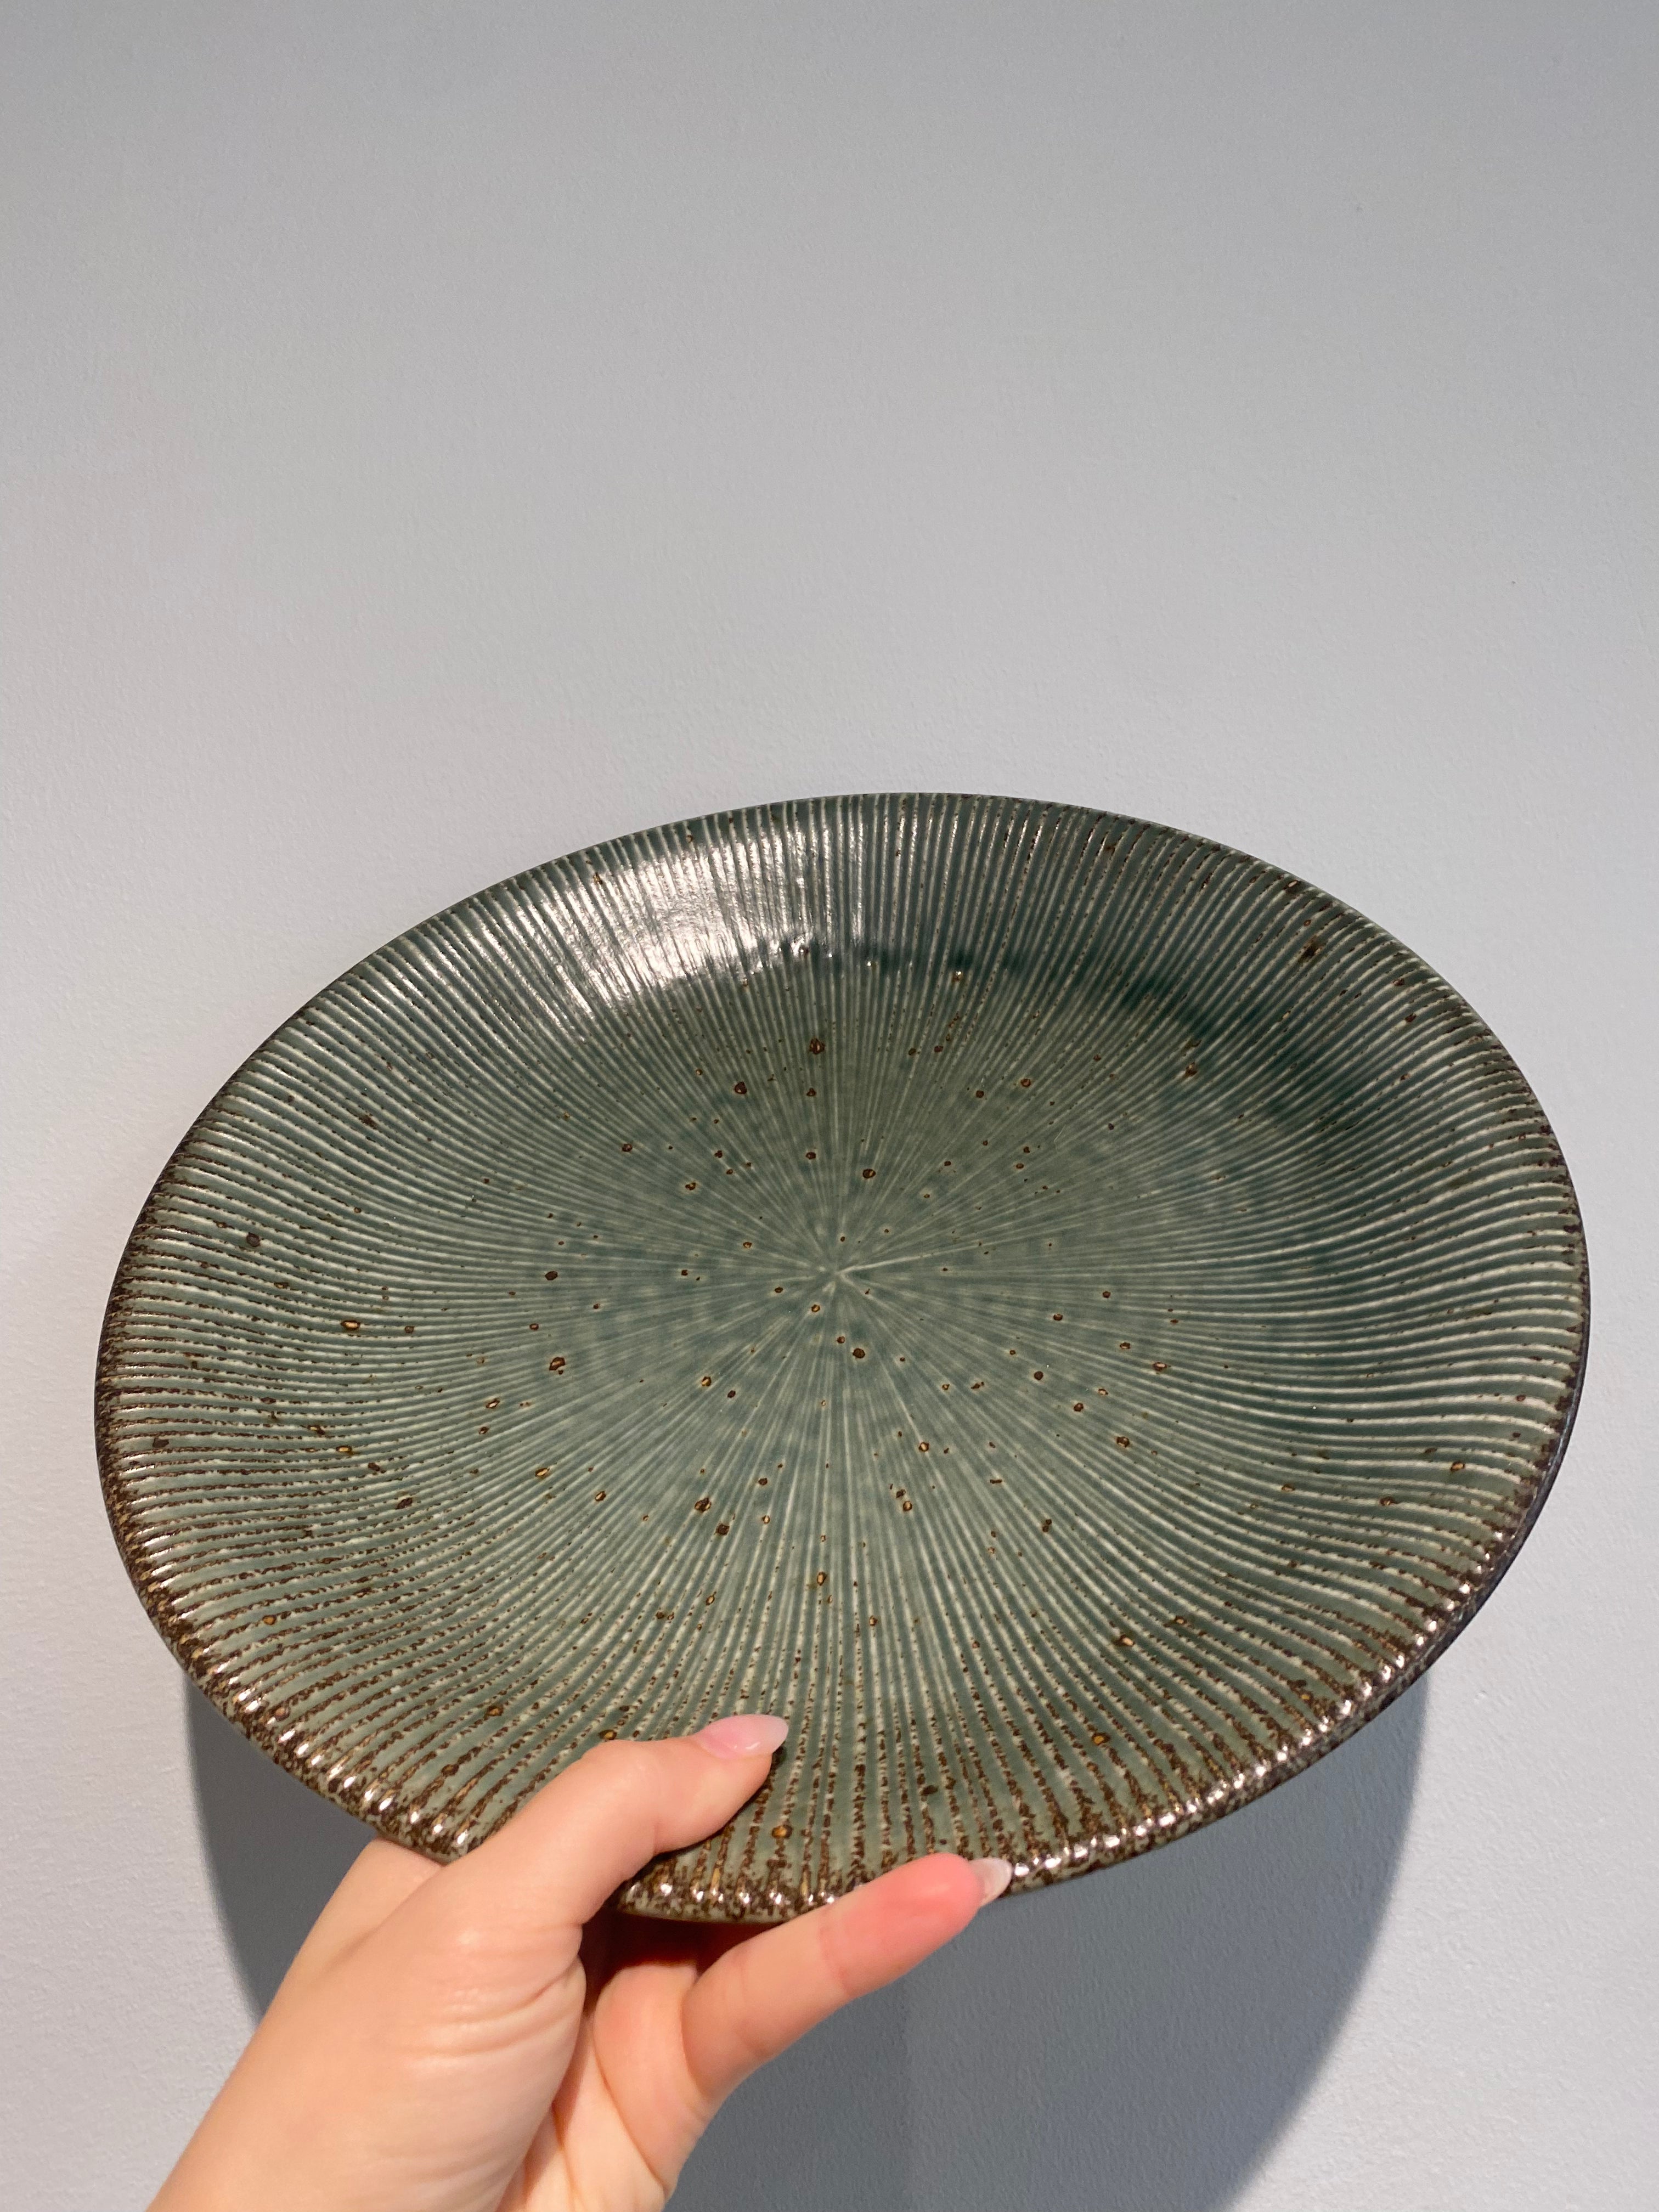 Japanese rustic dish with green glaze